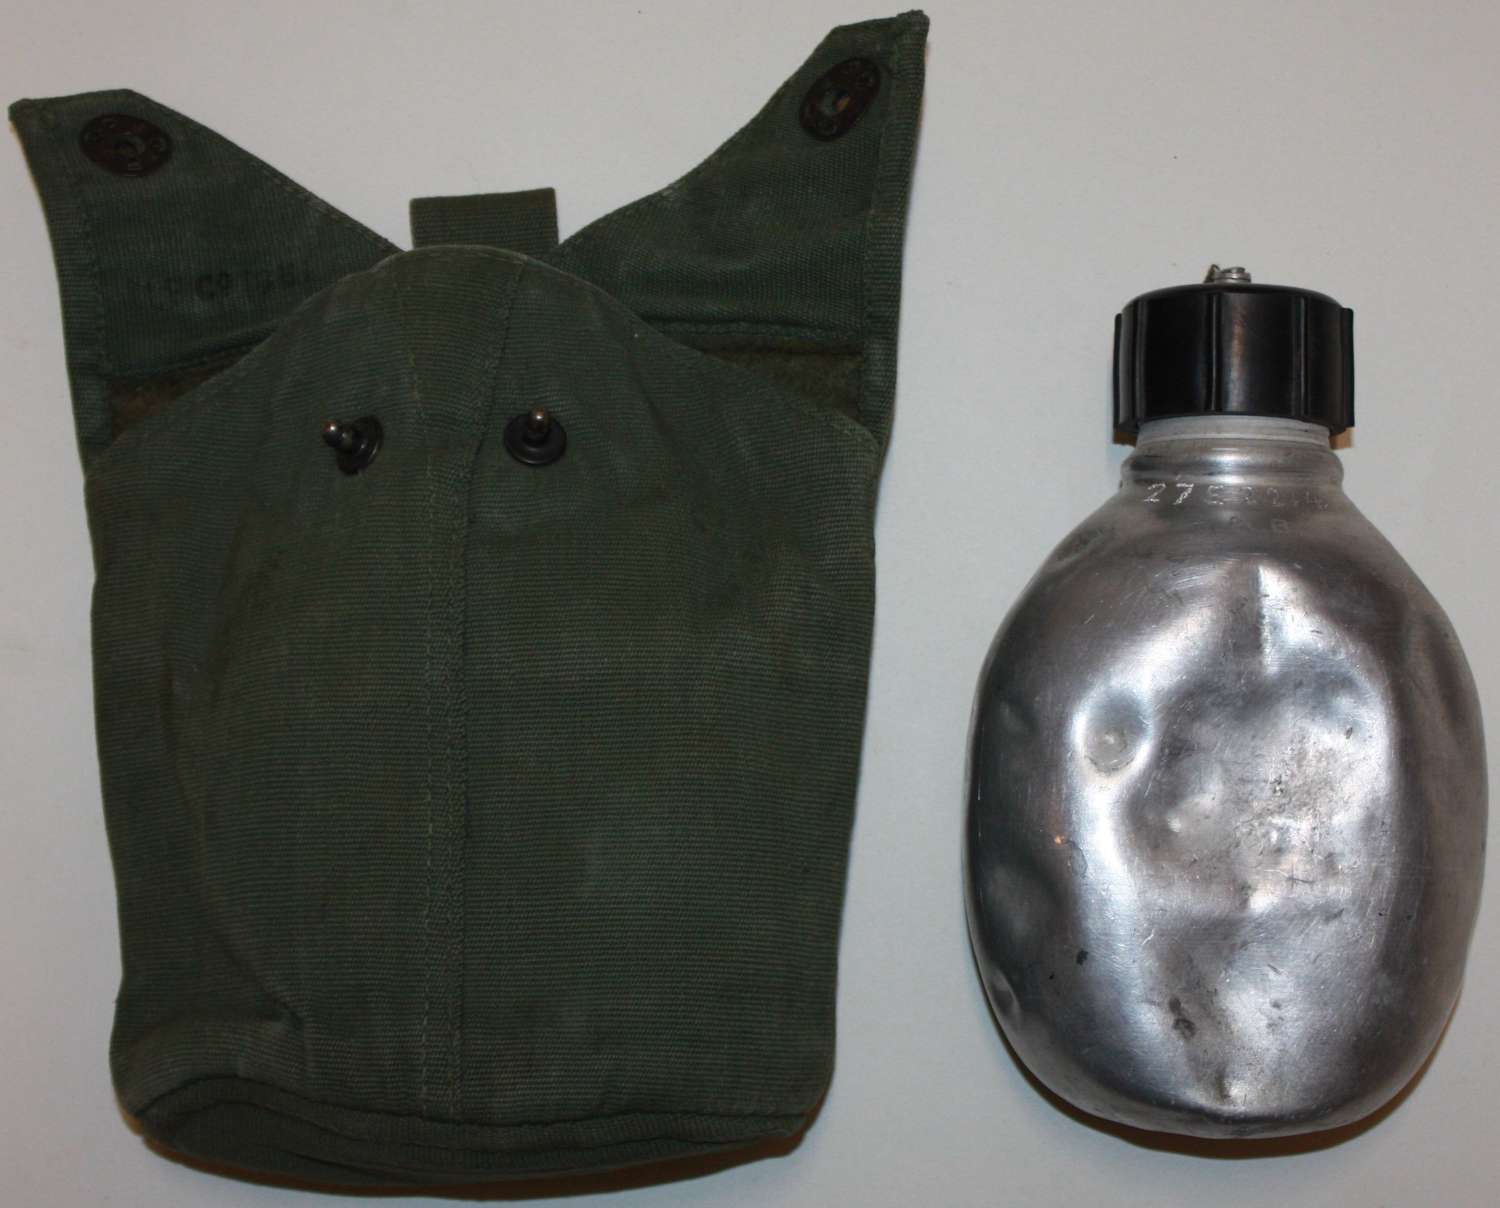 A PRIVATE PURCHASE 44 PATTERN / STYLE WATER BOTTLE POUCH